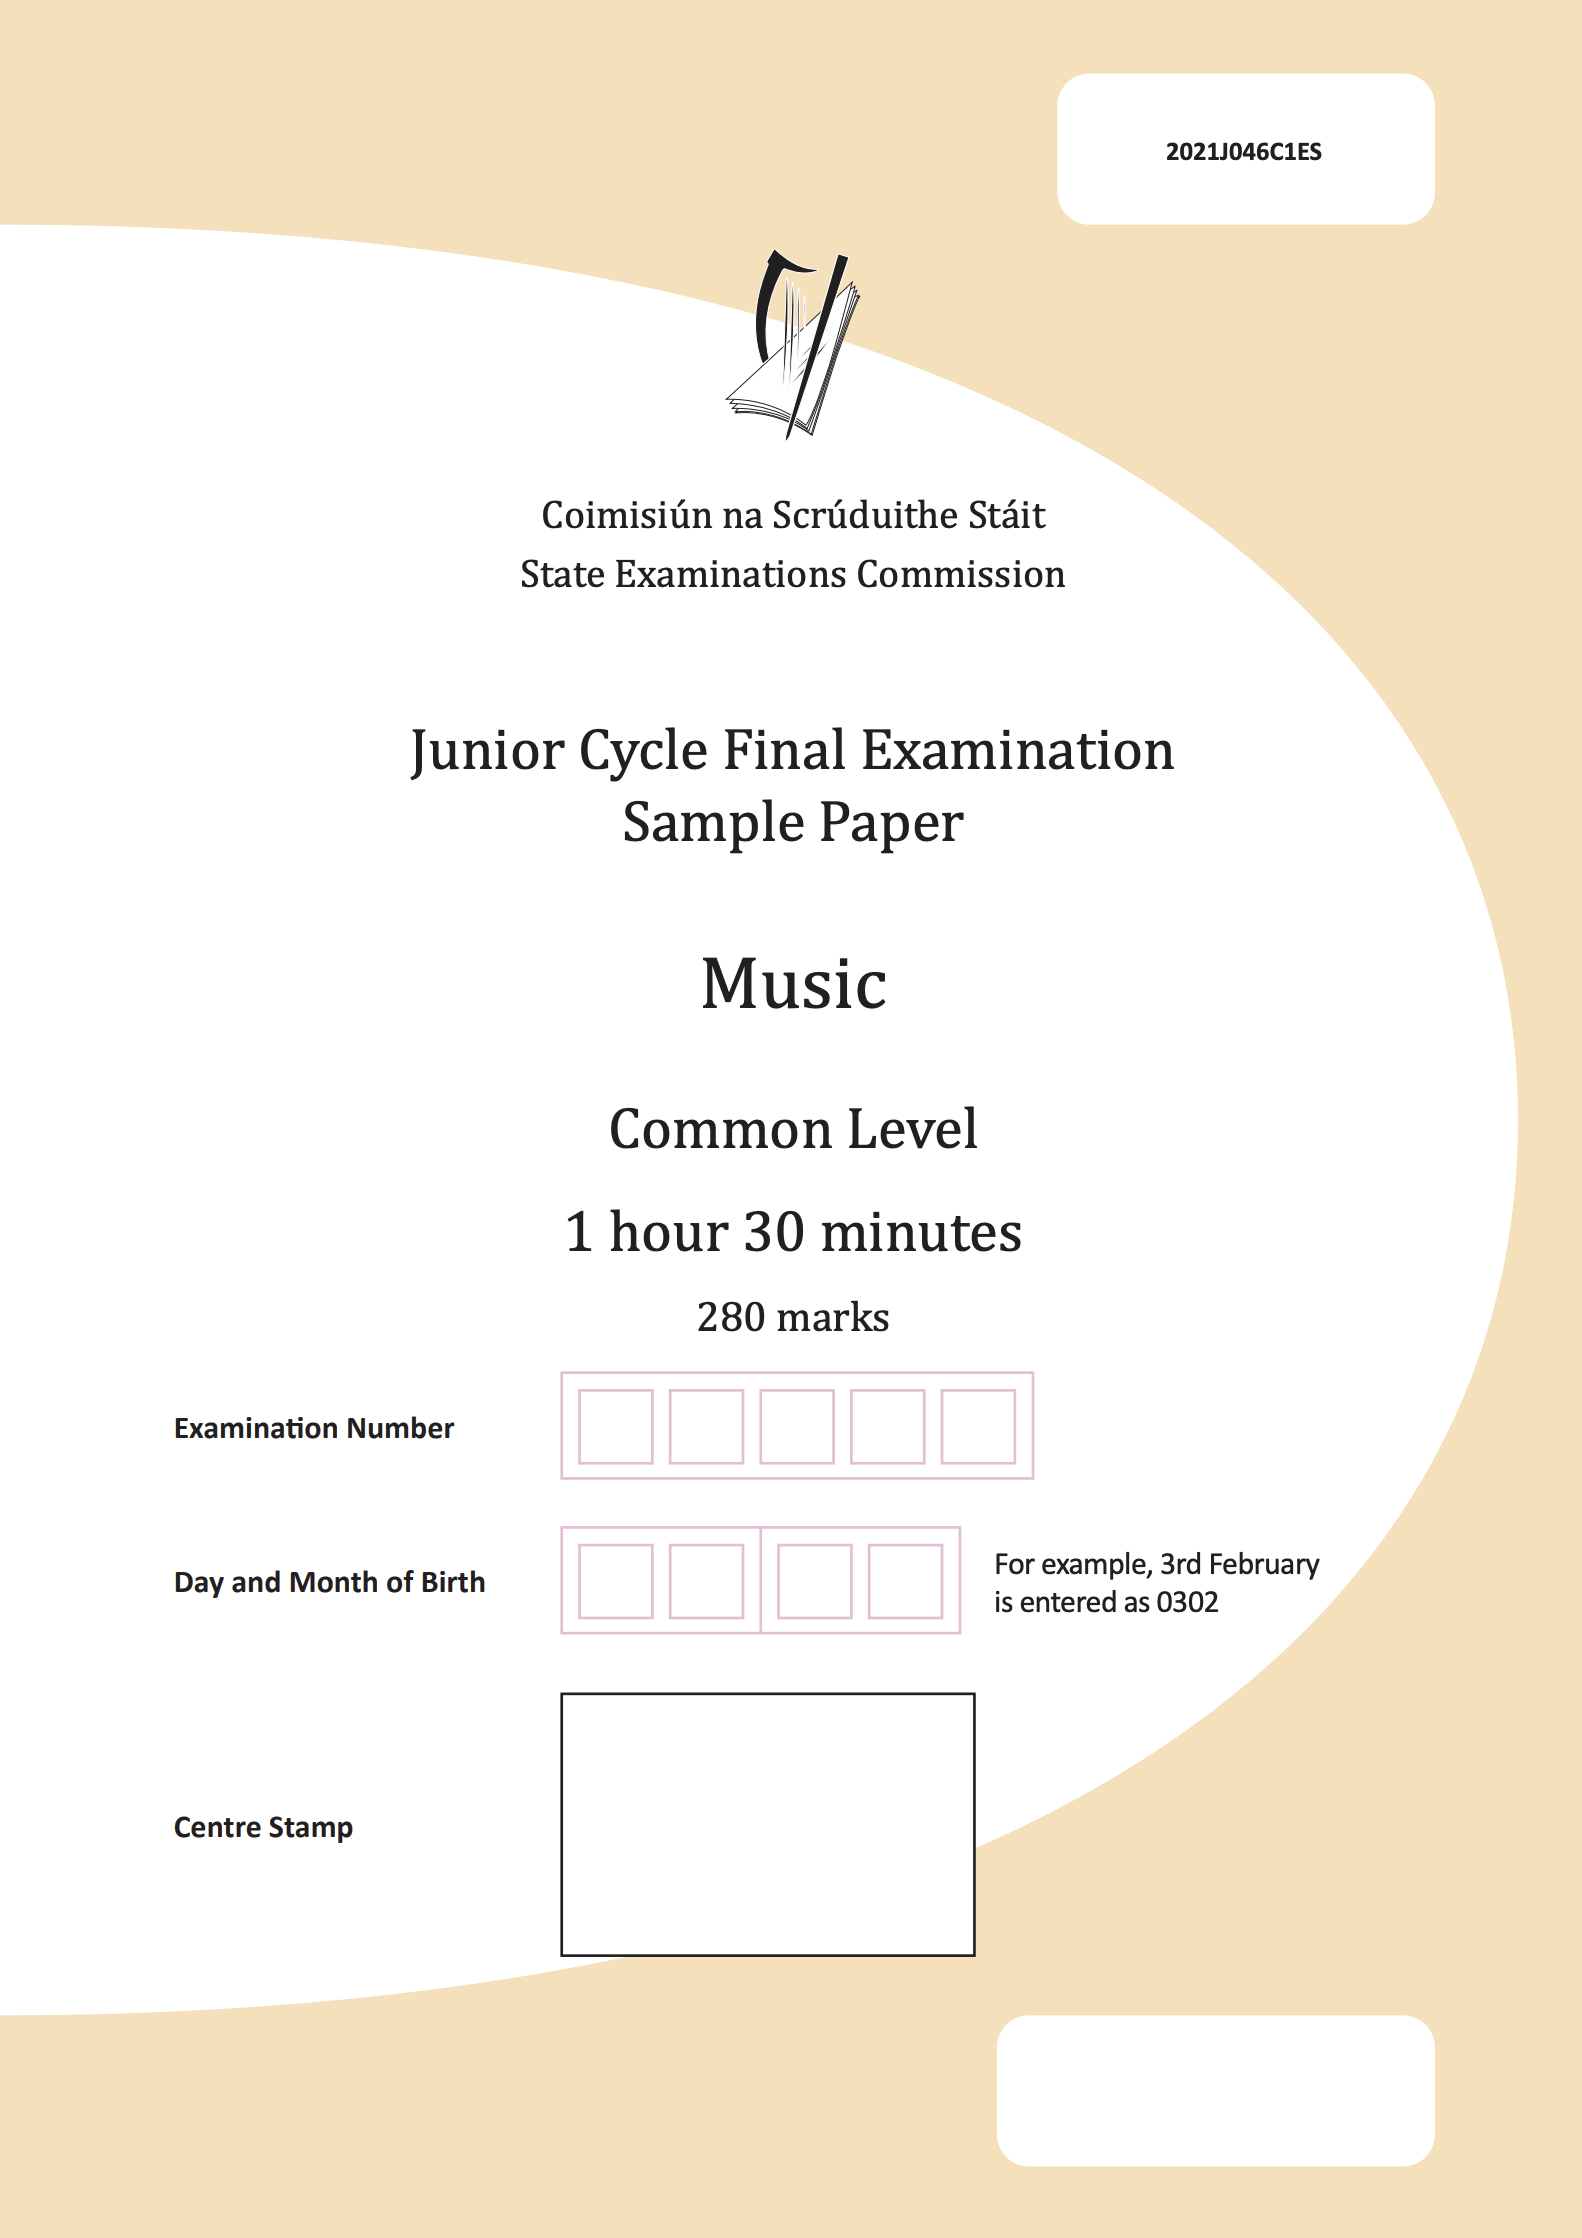 Link to State Examinations Commission Sample Paper